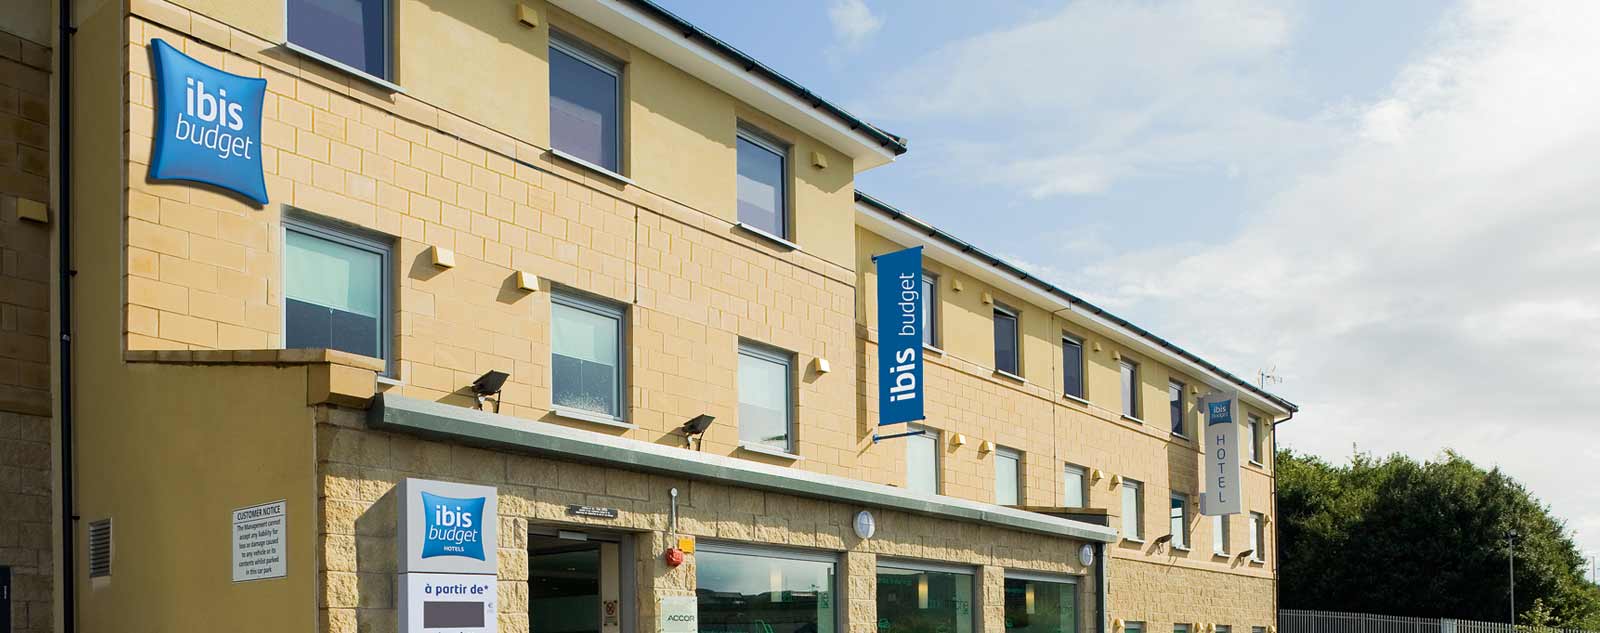 Hotel and hospitality investment - Ibis Budget Hotel Bradford